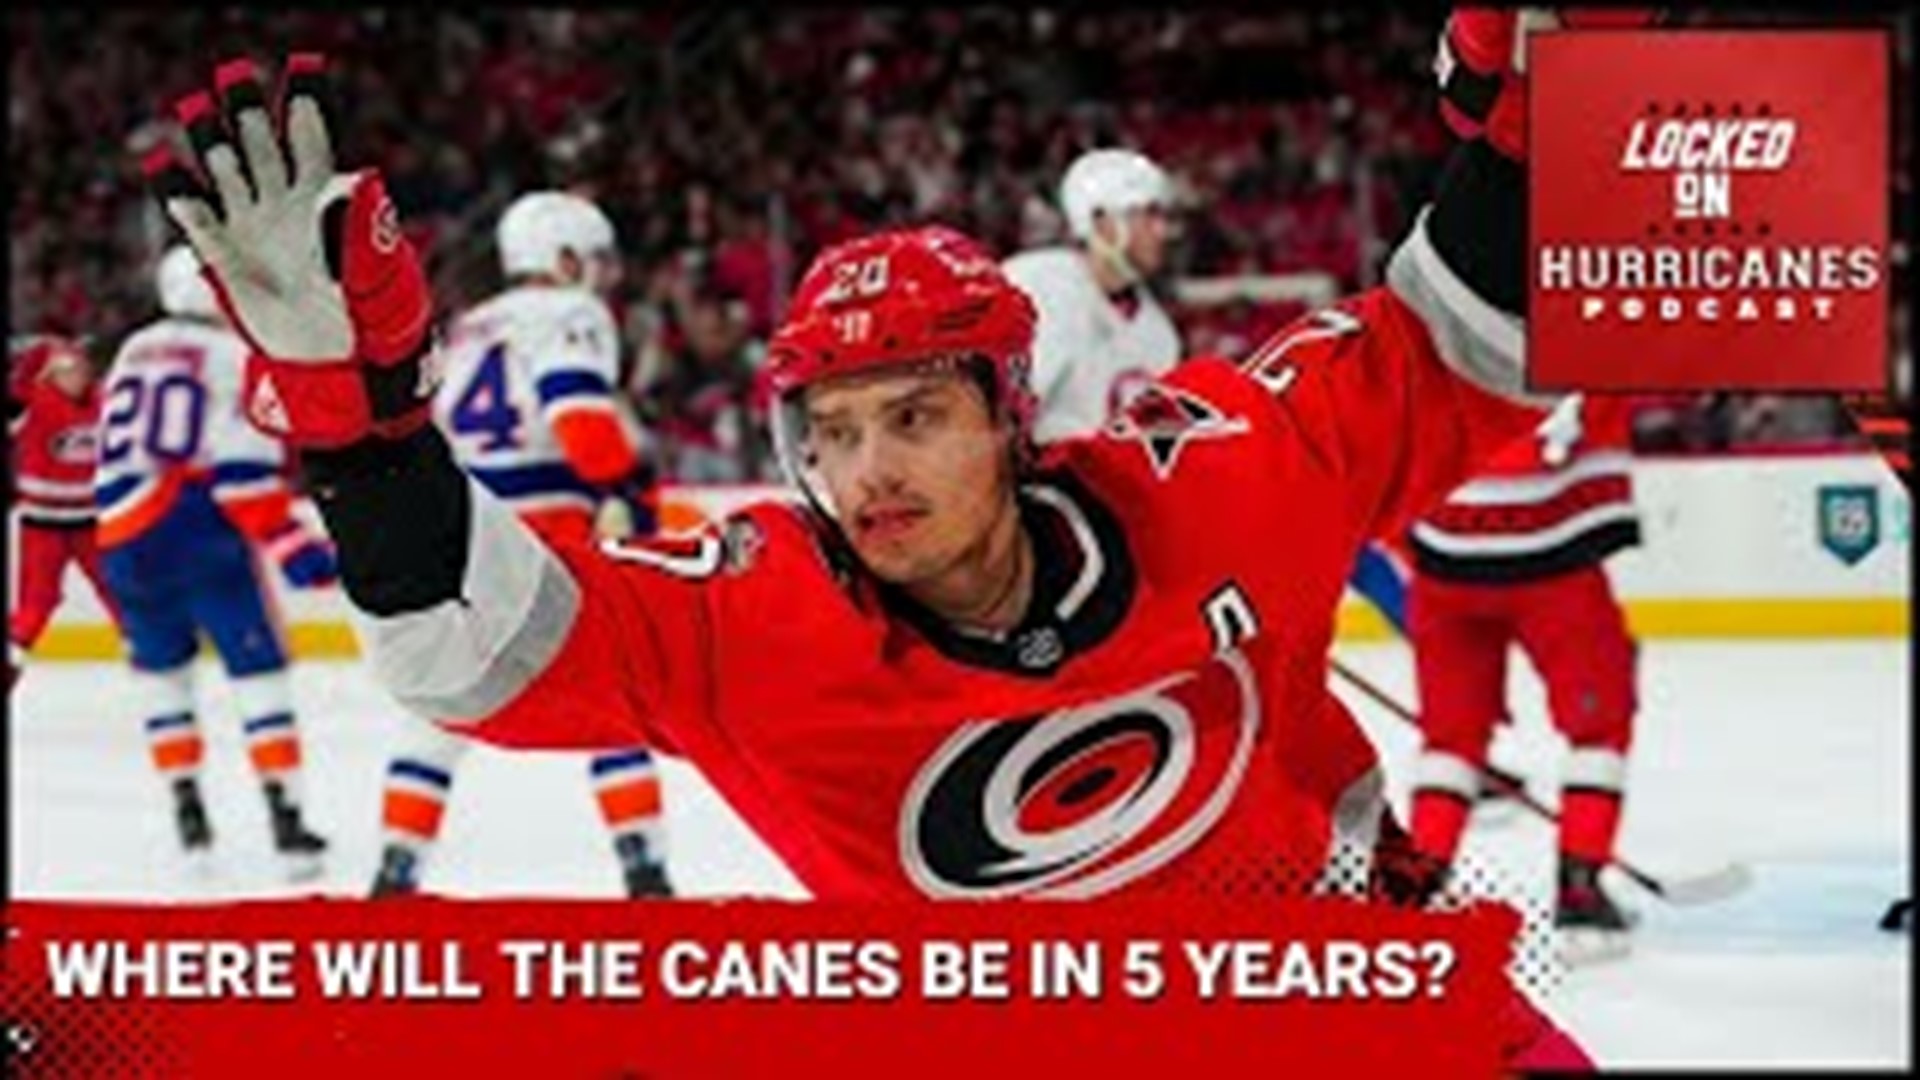 The Canes have risen to become perennial contenders in the last five years, but what about the next five? Can they keep it up? That and more on Locked On Hurricanes.